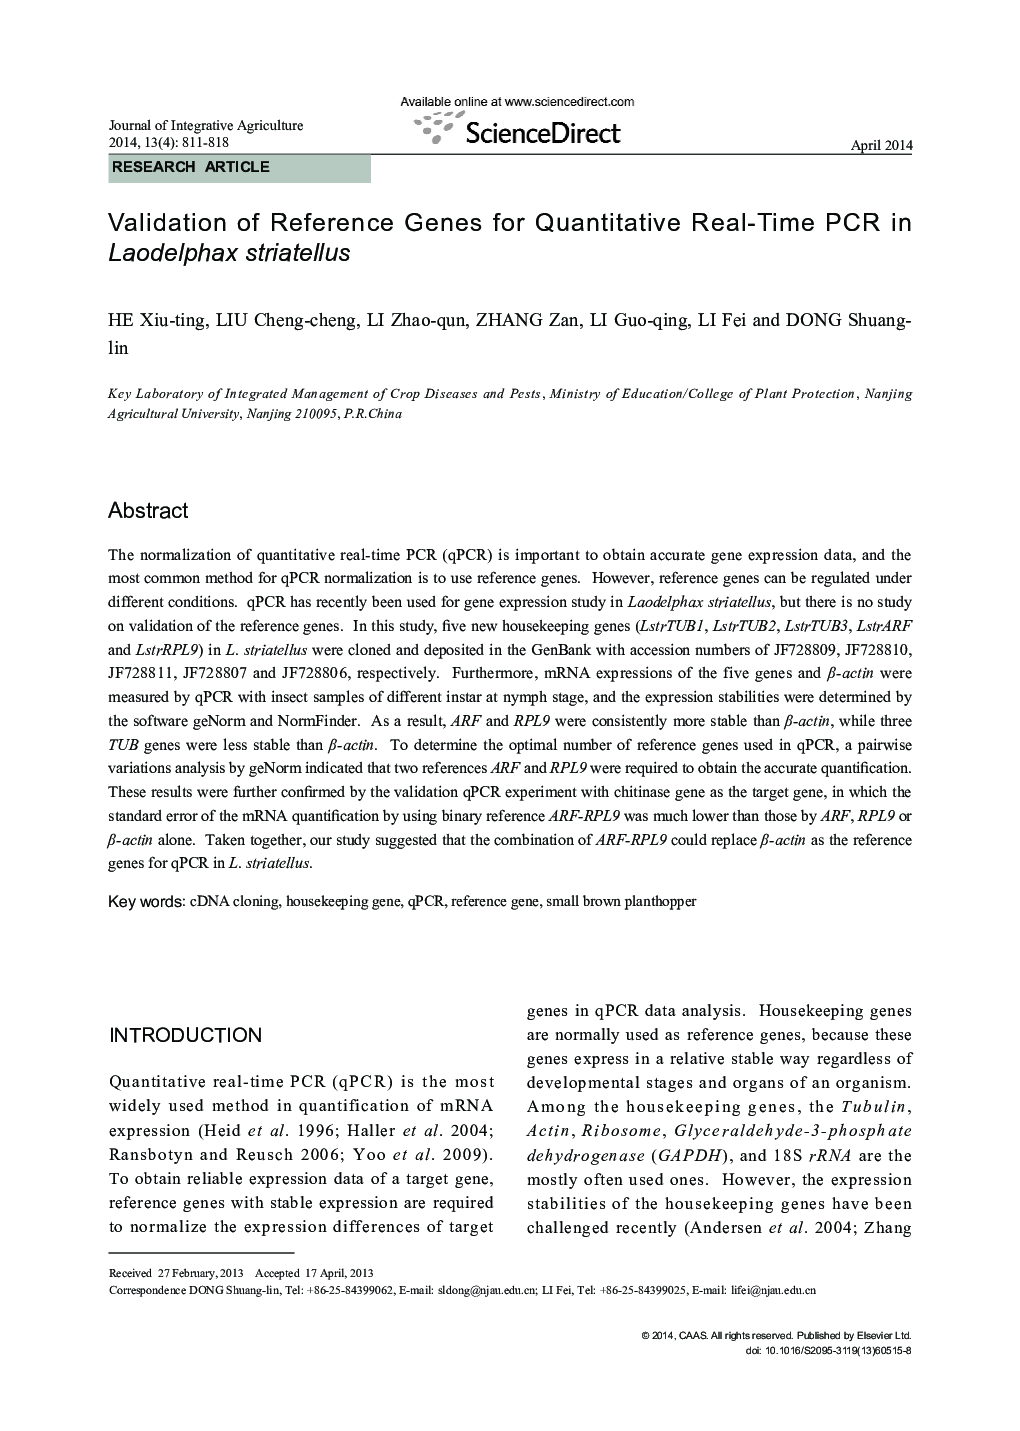 Validation of Reference Genes for Quantitative Real-Time PCR in Laodelphax striatellus